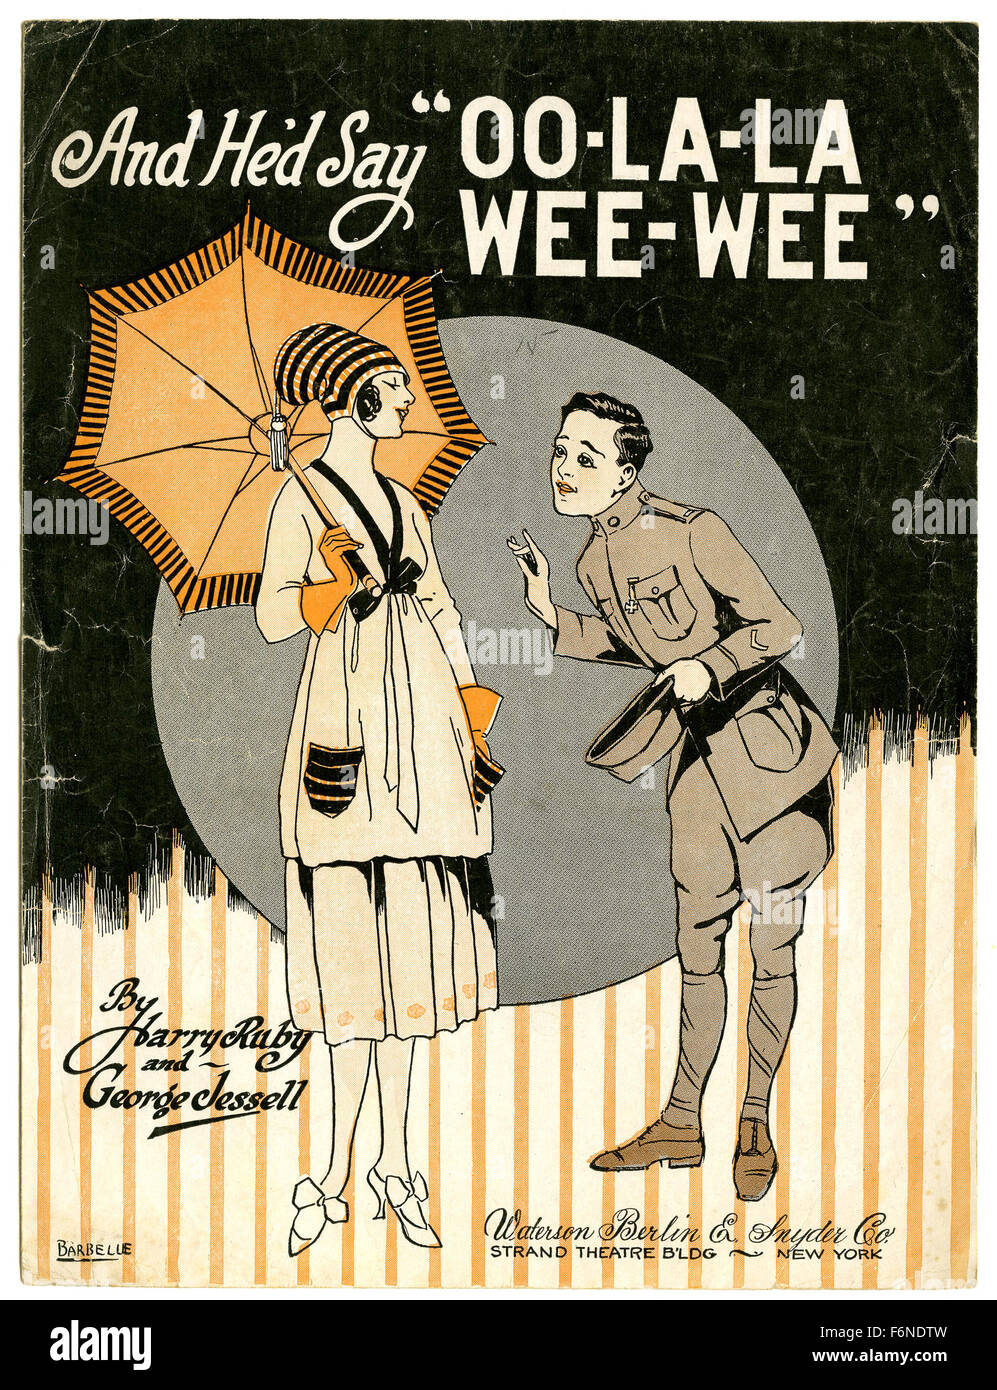 'And He'd Say 'OO-LA-LA WEE-WEE'' 1919 by Harry Ruby and George Clessell piano sheet music cover Stock Photo